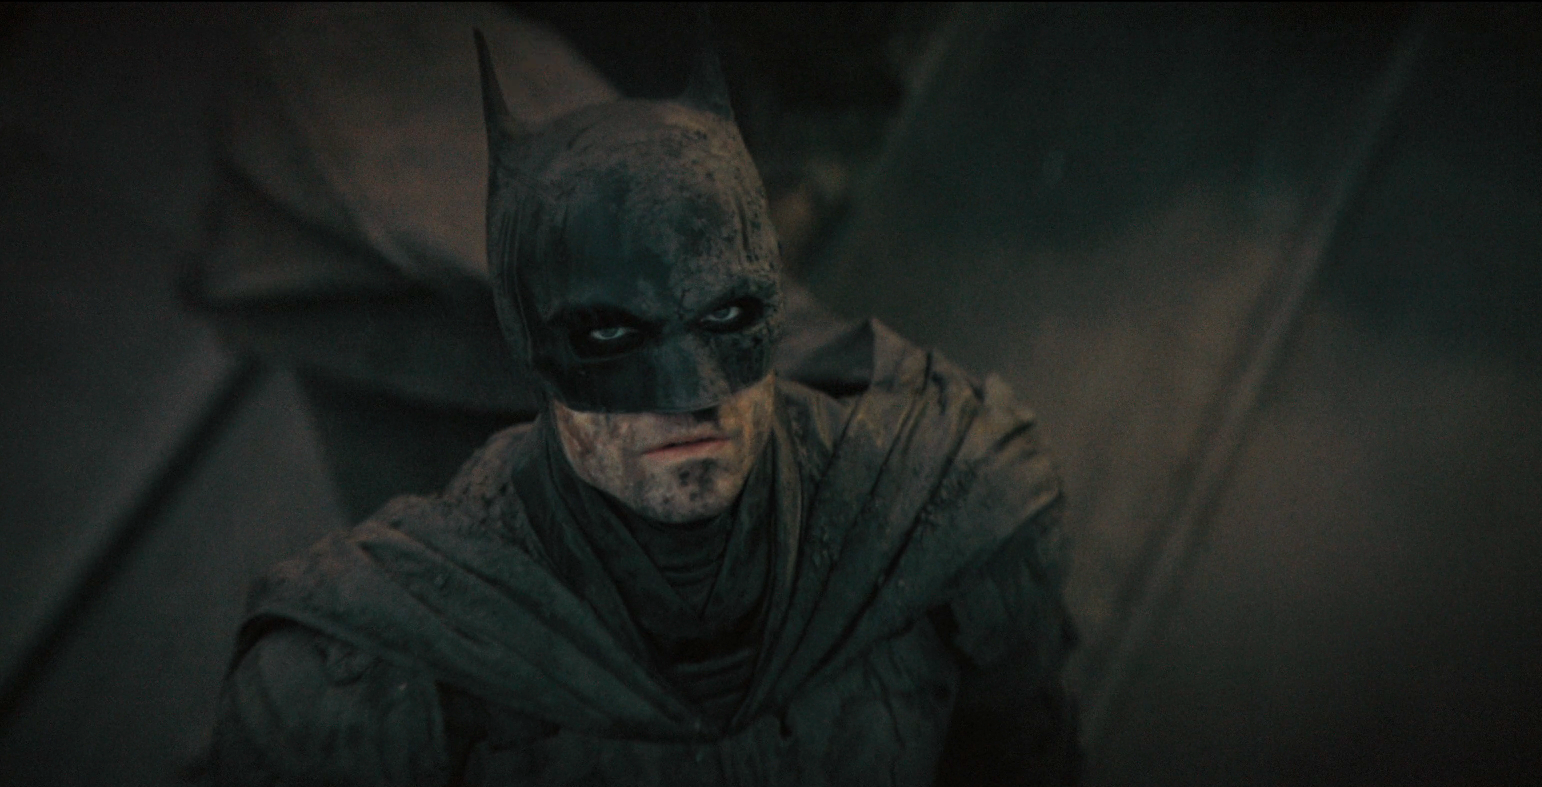 The Batman 2 Officially Confirmed With Robert Pattinson Returning!